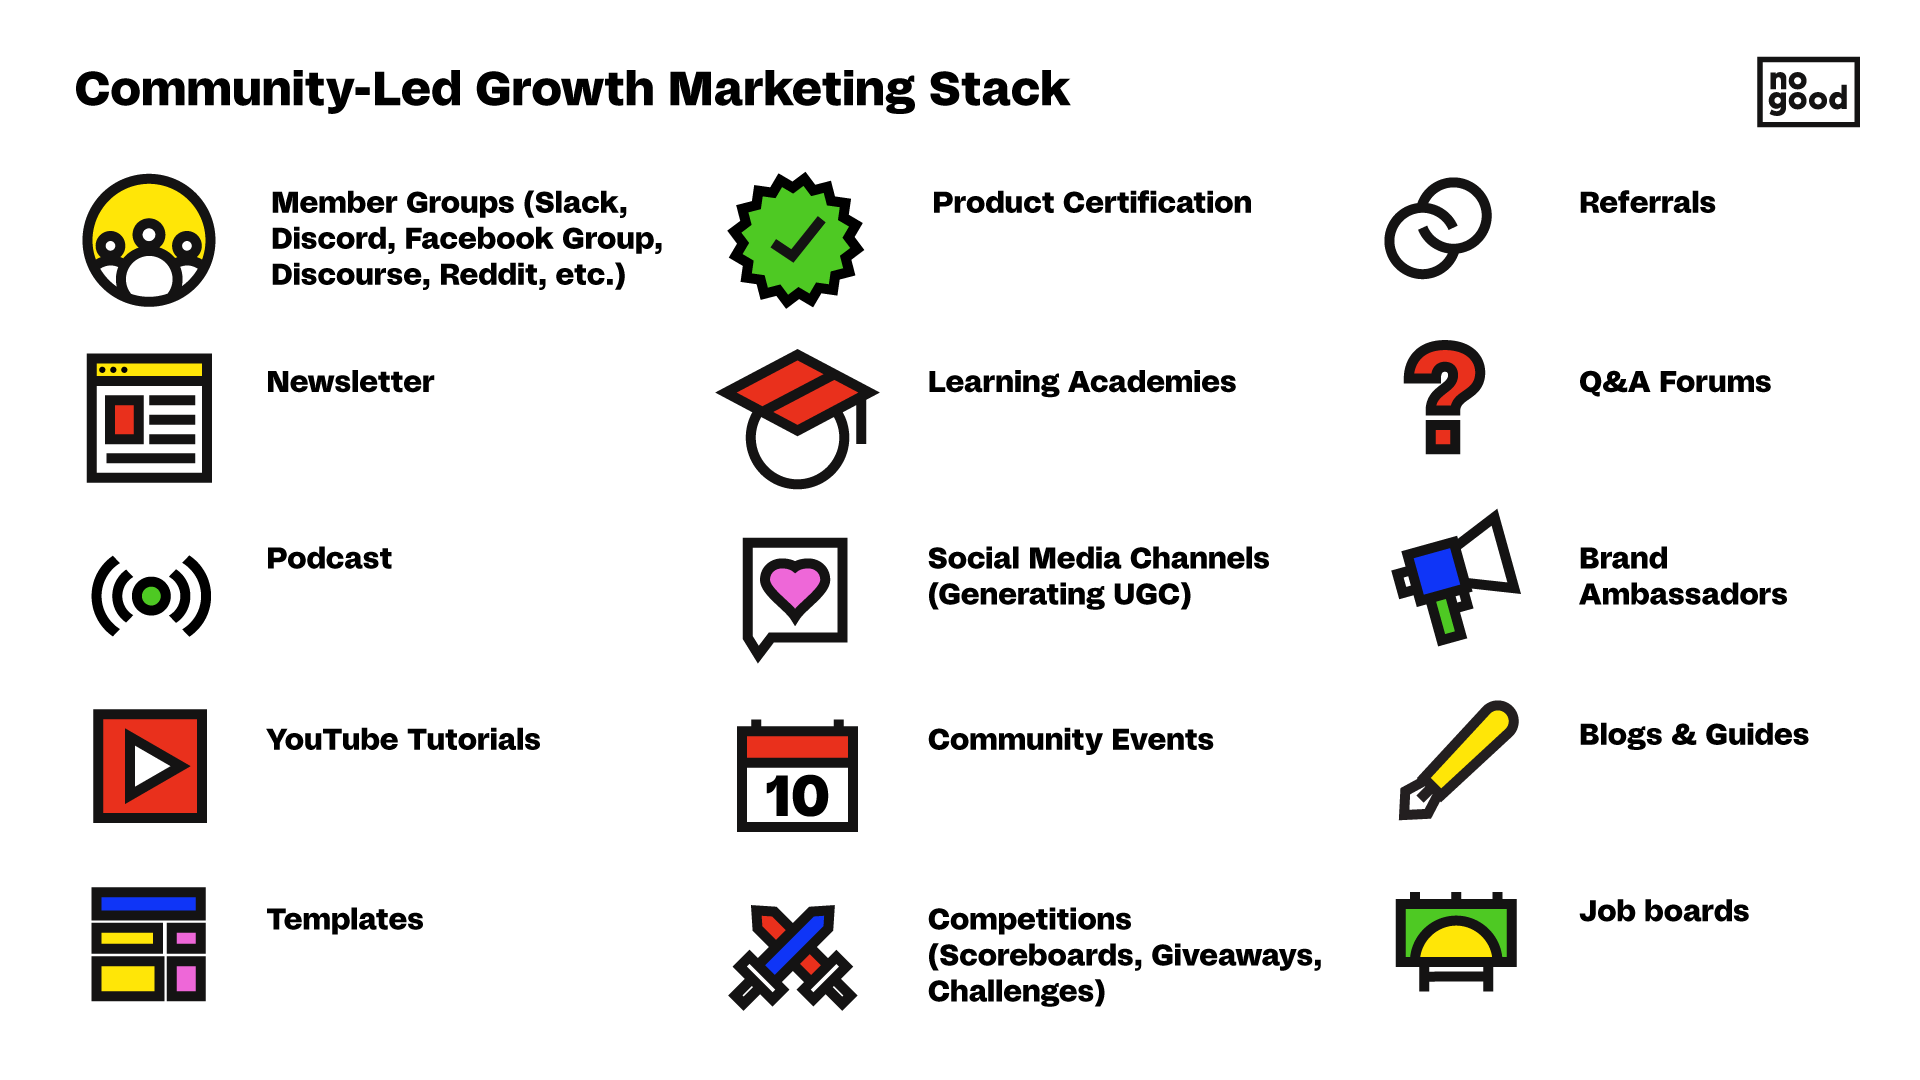 Community-led growth marketing stack including member groups, newsletters, social media channels, forums, blogs, and more.